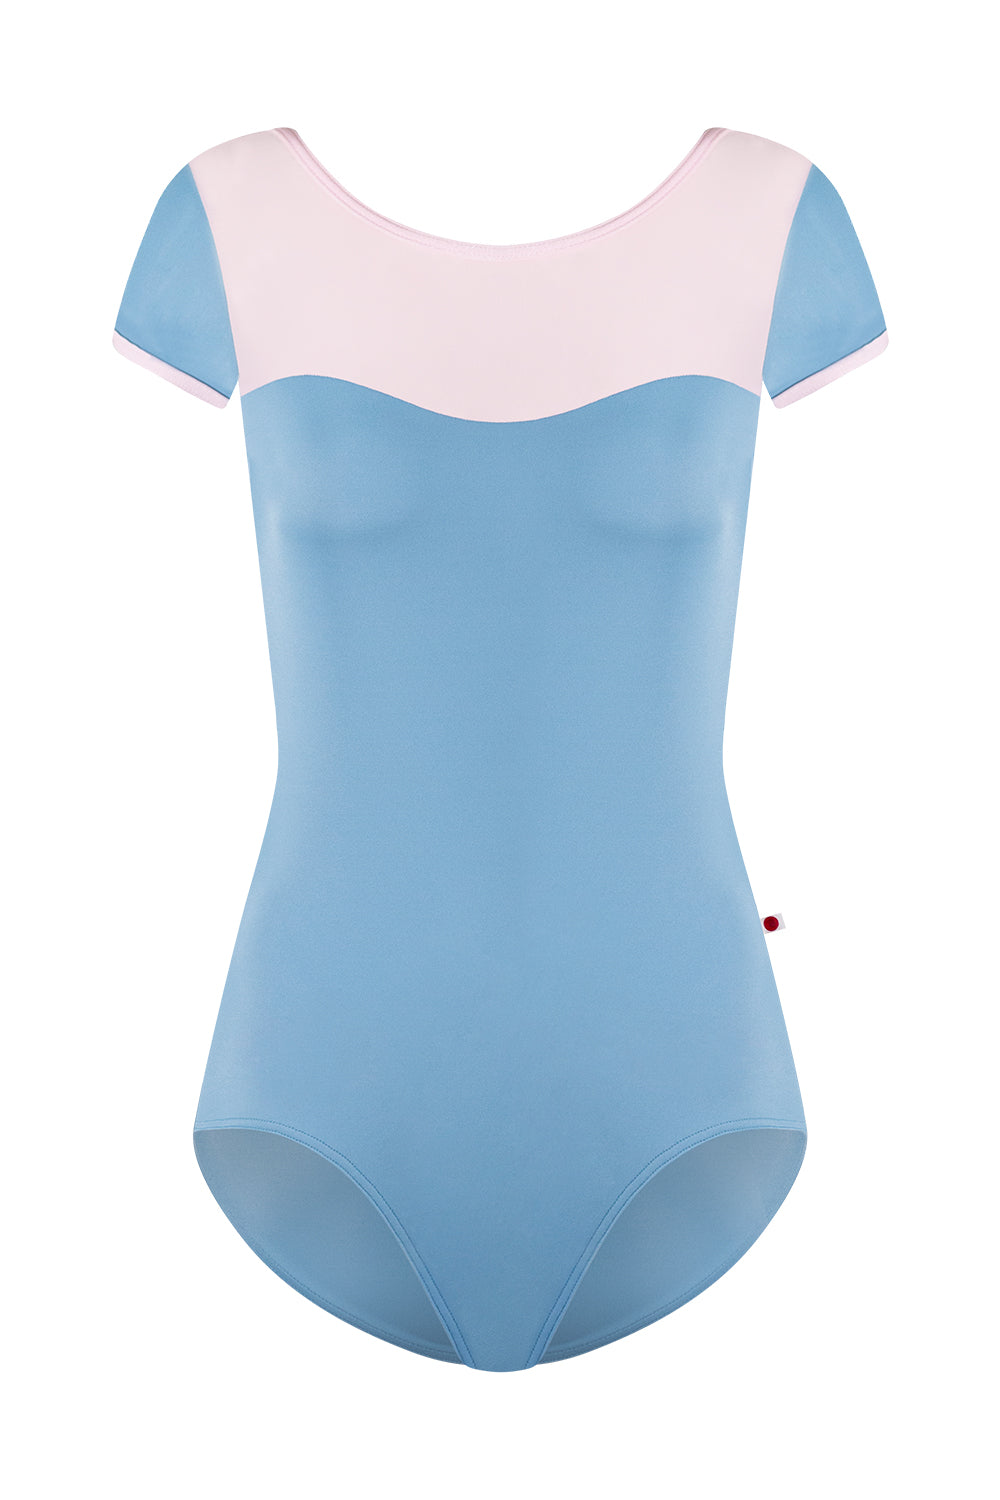 Jane leotard in T-Bluebell body color with Mesh Rose top color and N-Rose trim color 